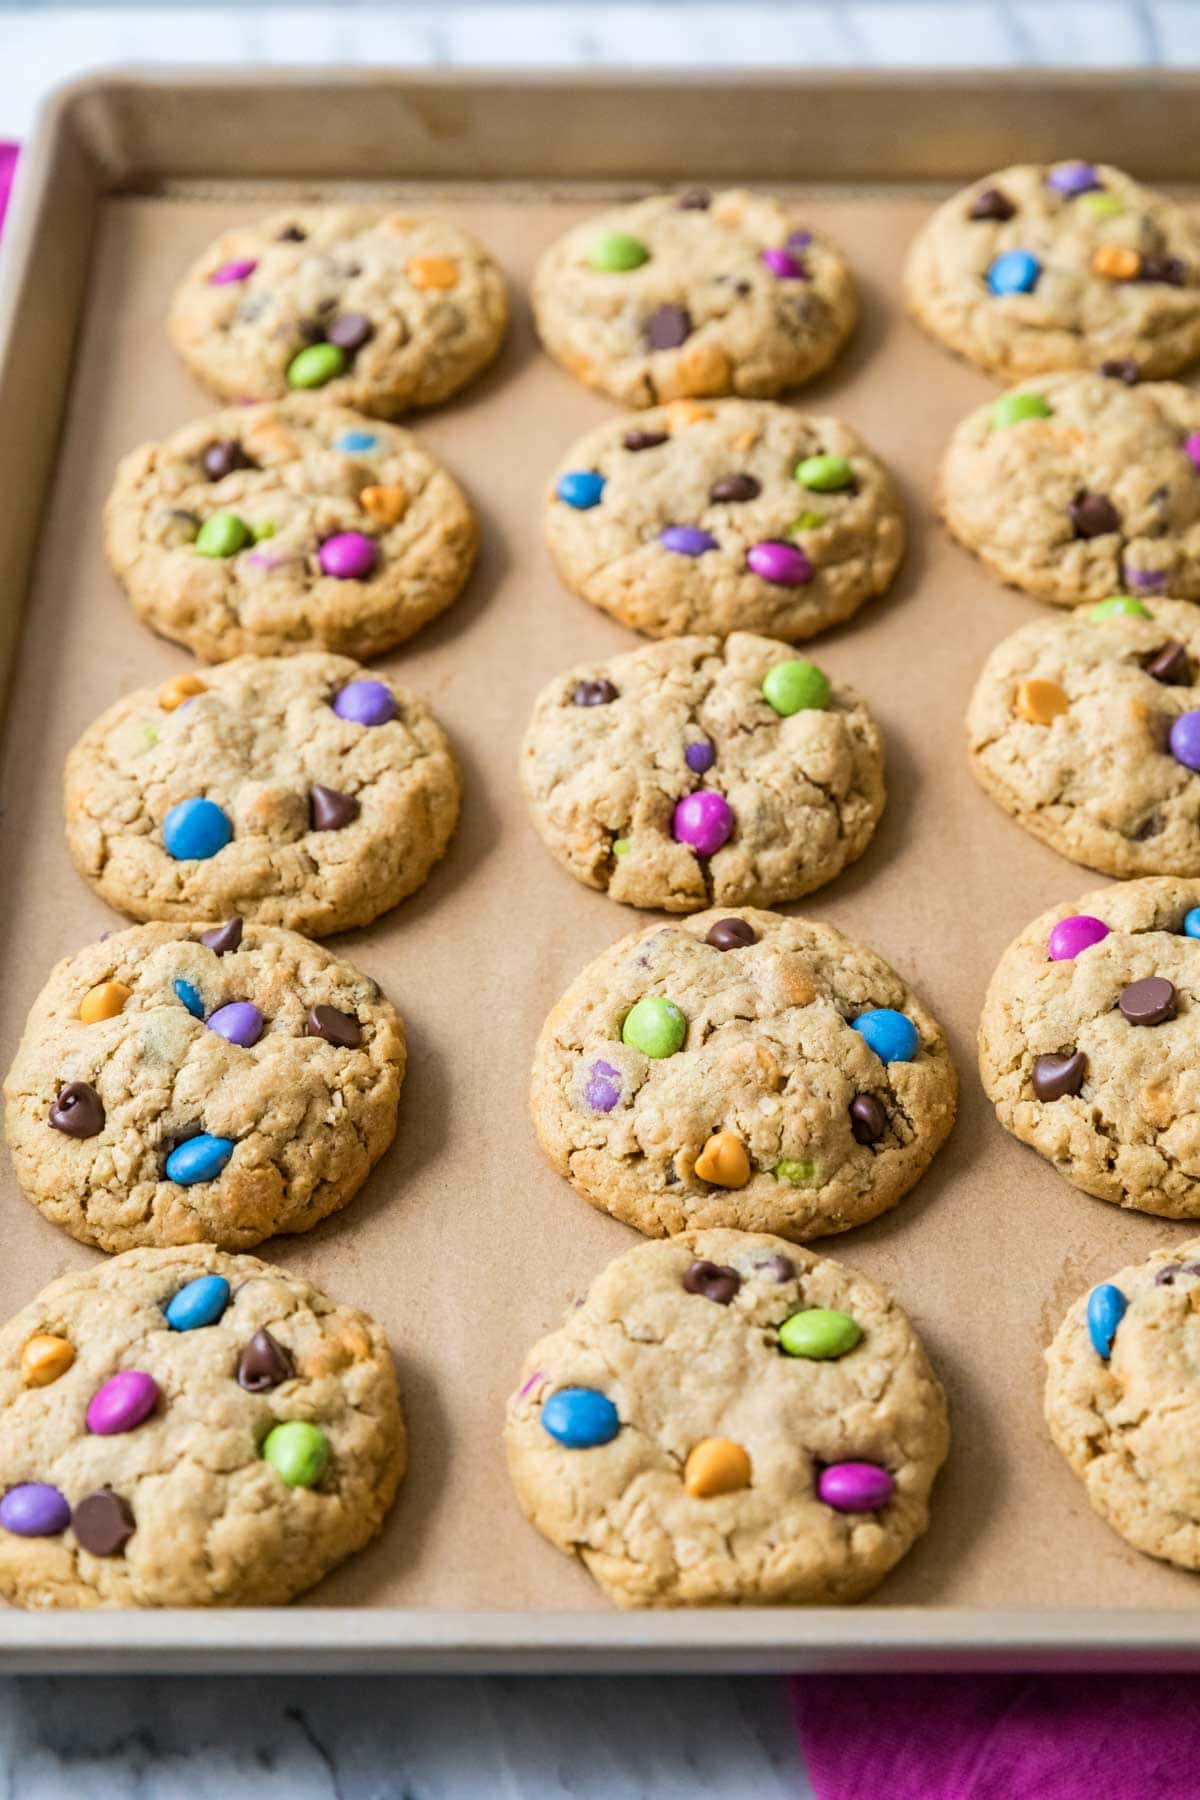 Rows of monster cookies made with colorful candies on a baking sheet.